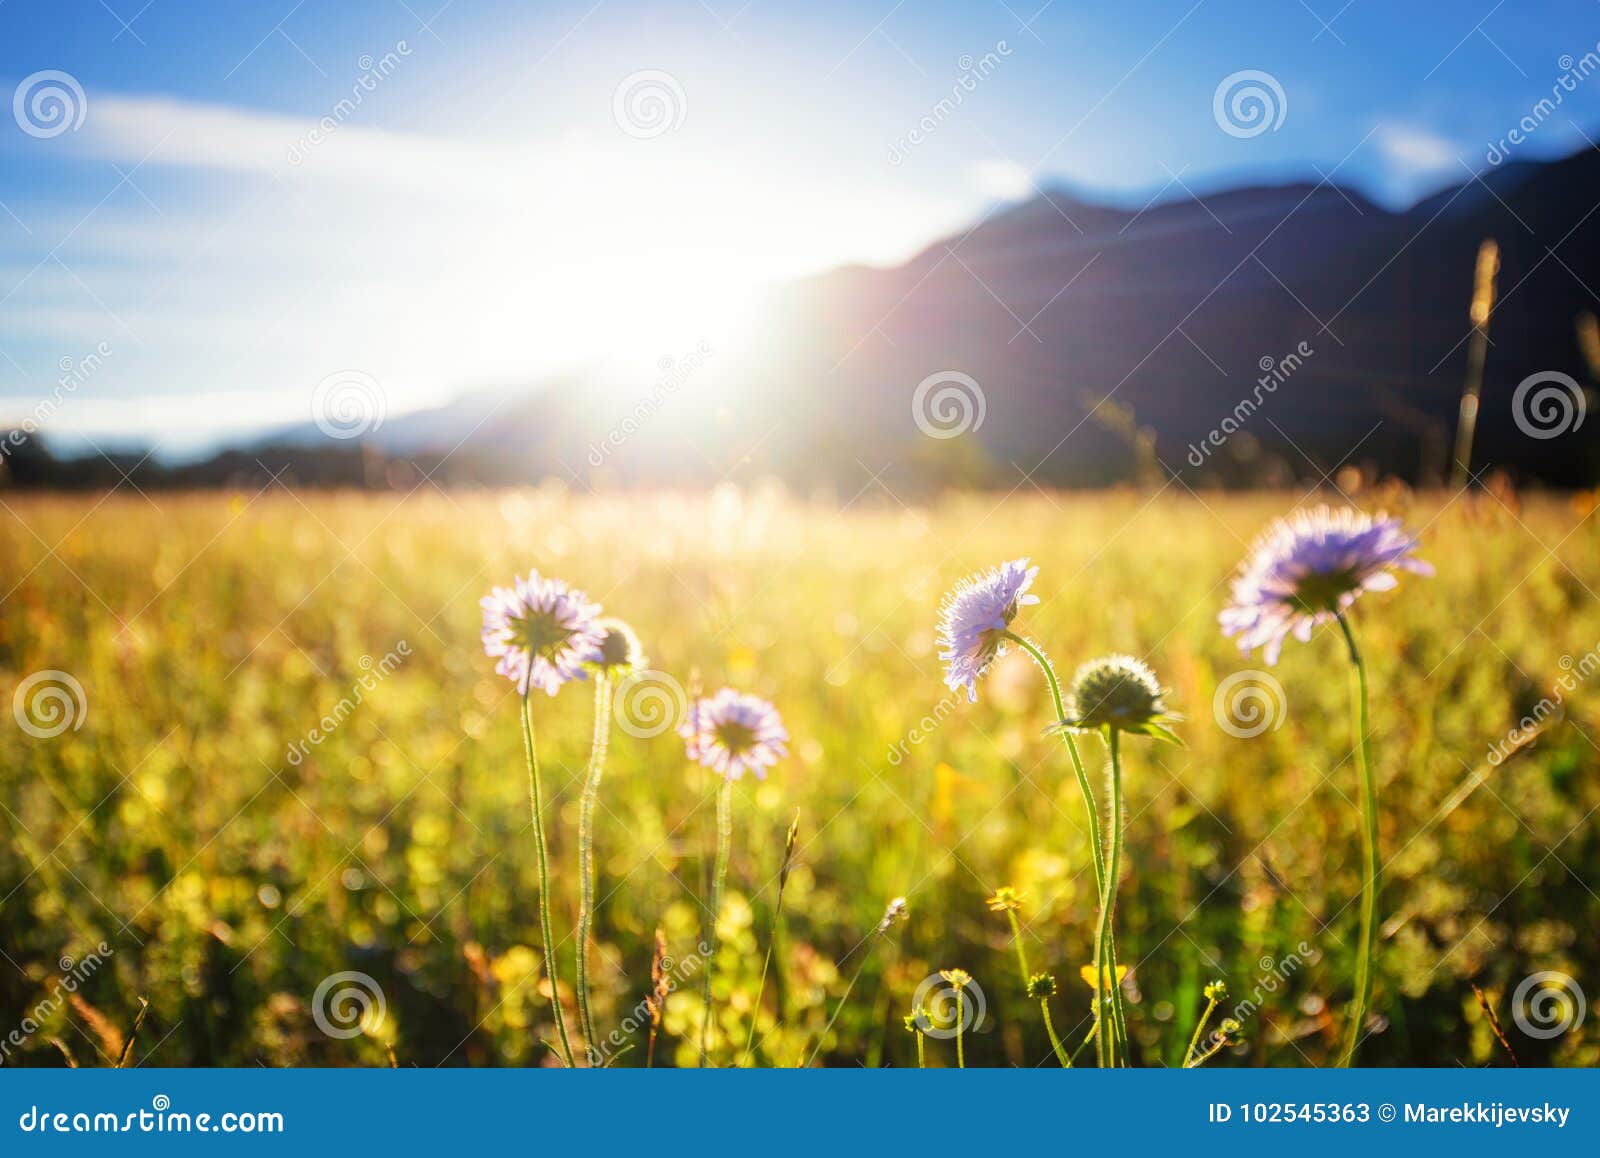 beautiful spring meadow. sunny clear sky with sunlight in mountains. colorful field full of flowers. grainau, germany